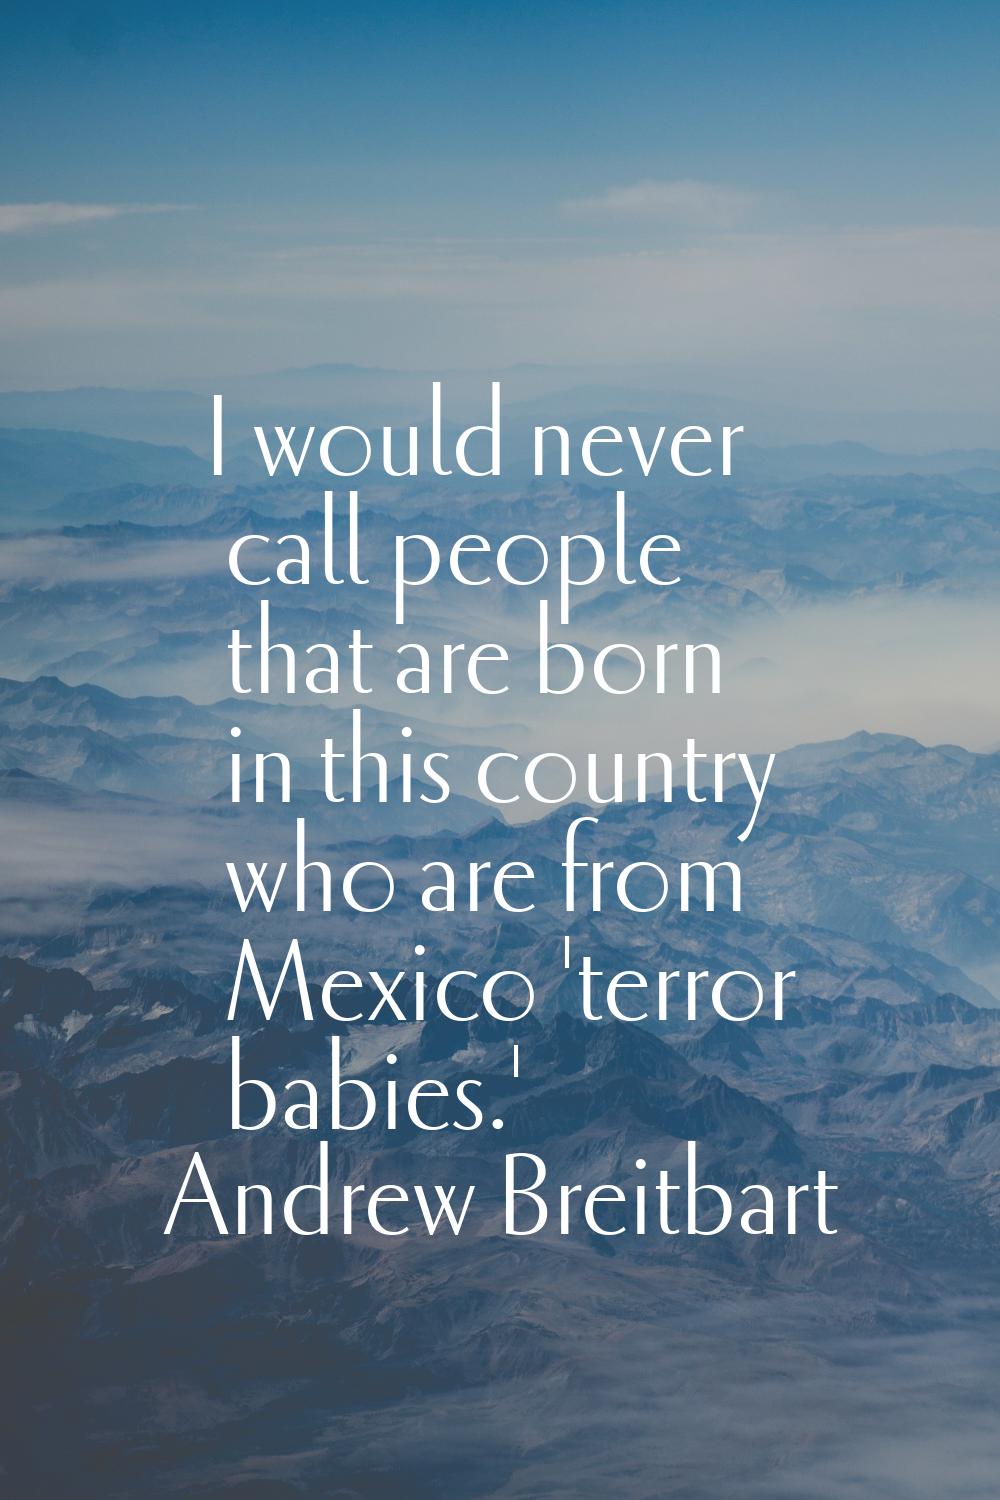 I would never call people that are born in this country who are from Mexico 'terror babies.'